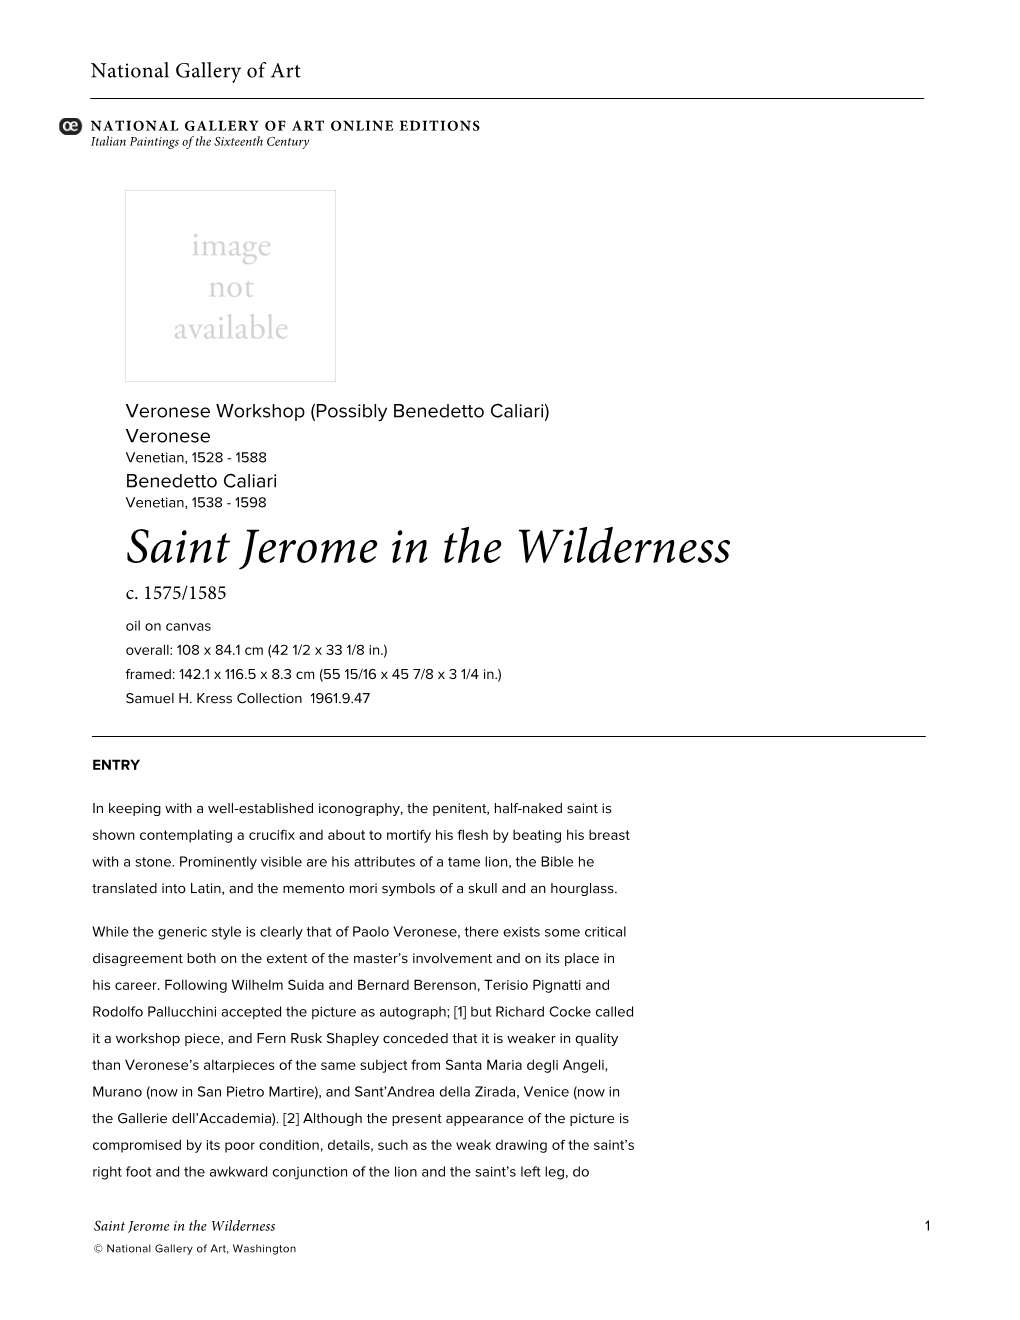 Saint Jerome in the Wilderness C